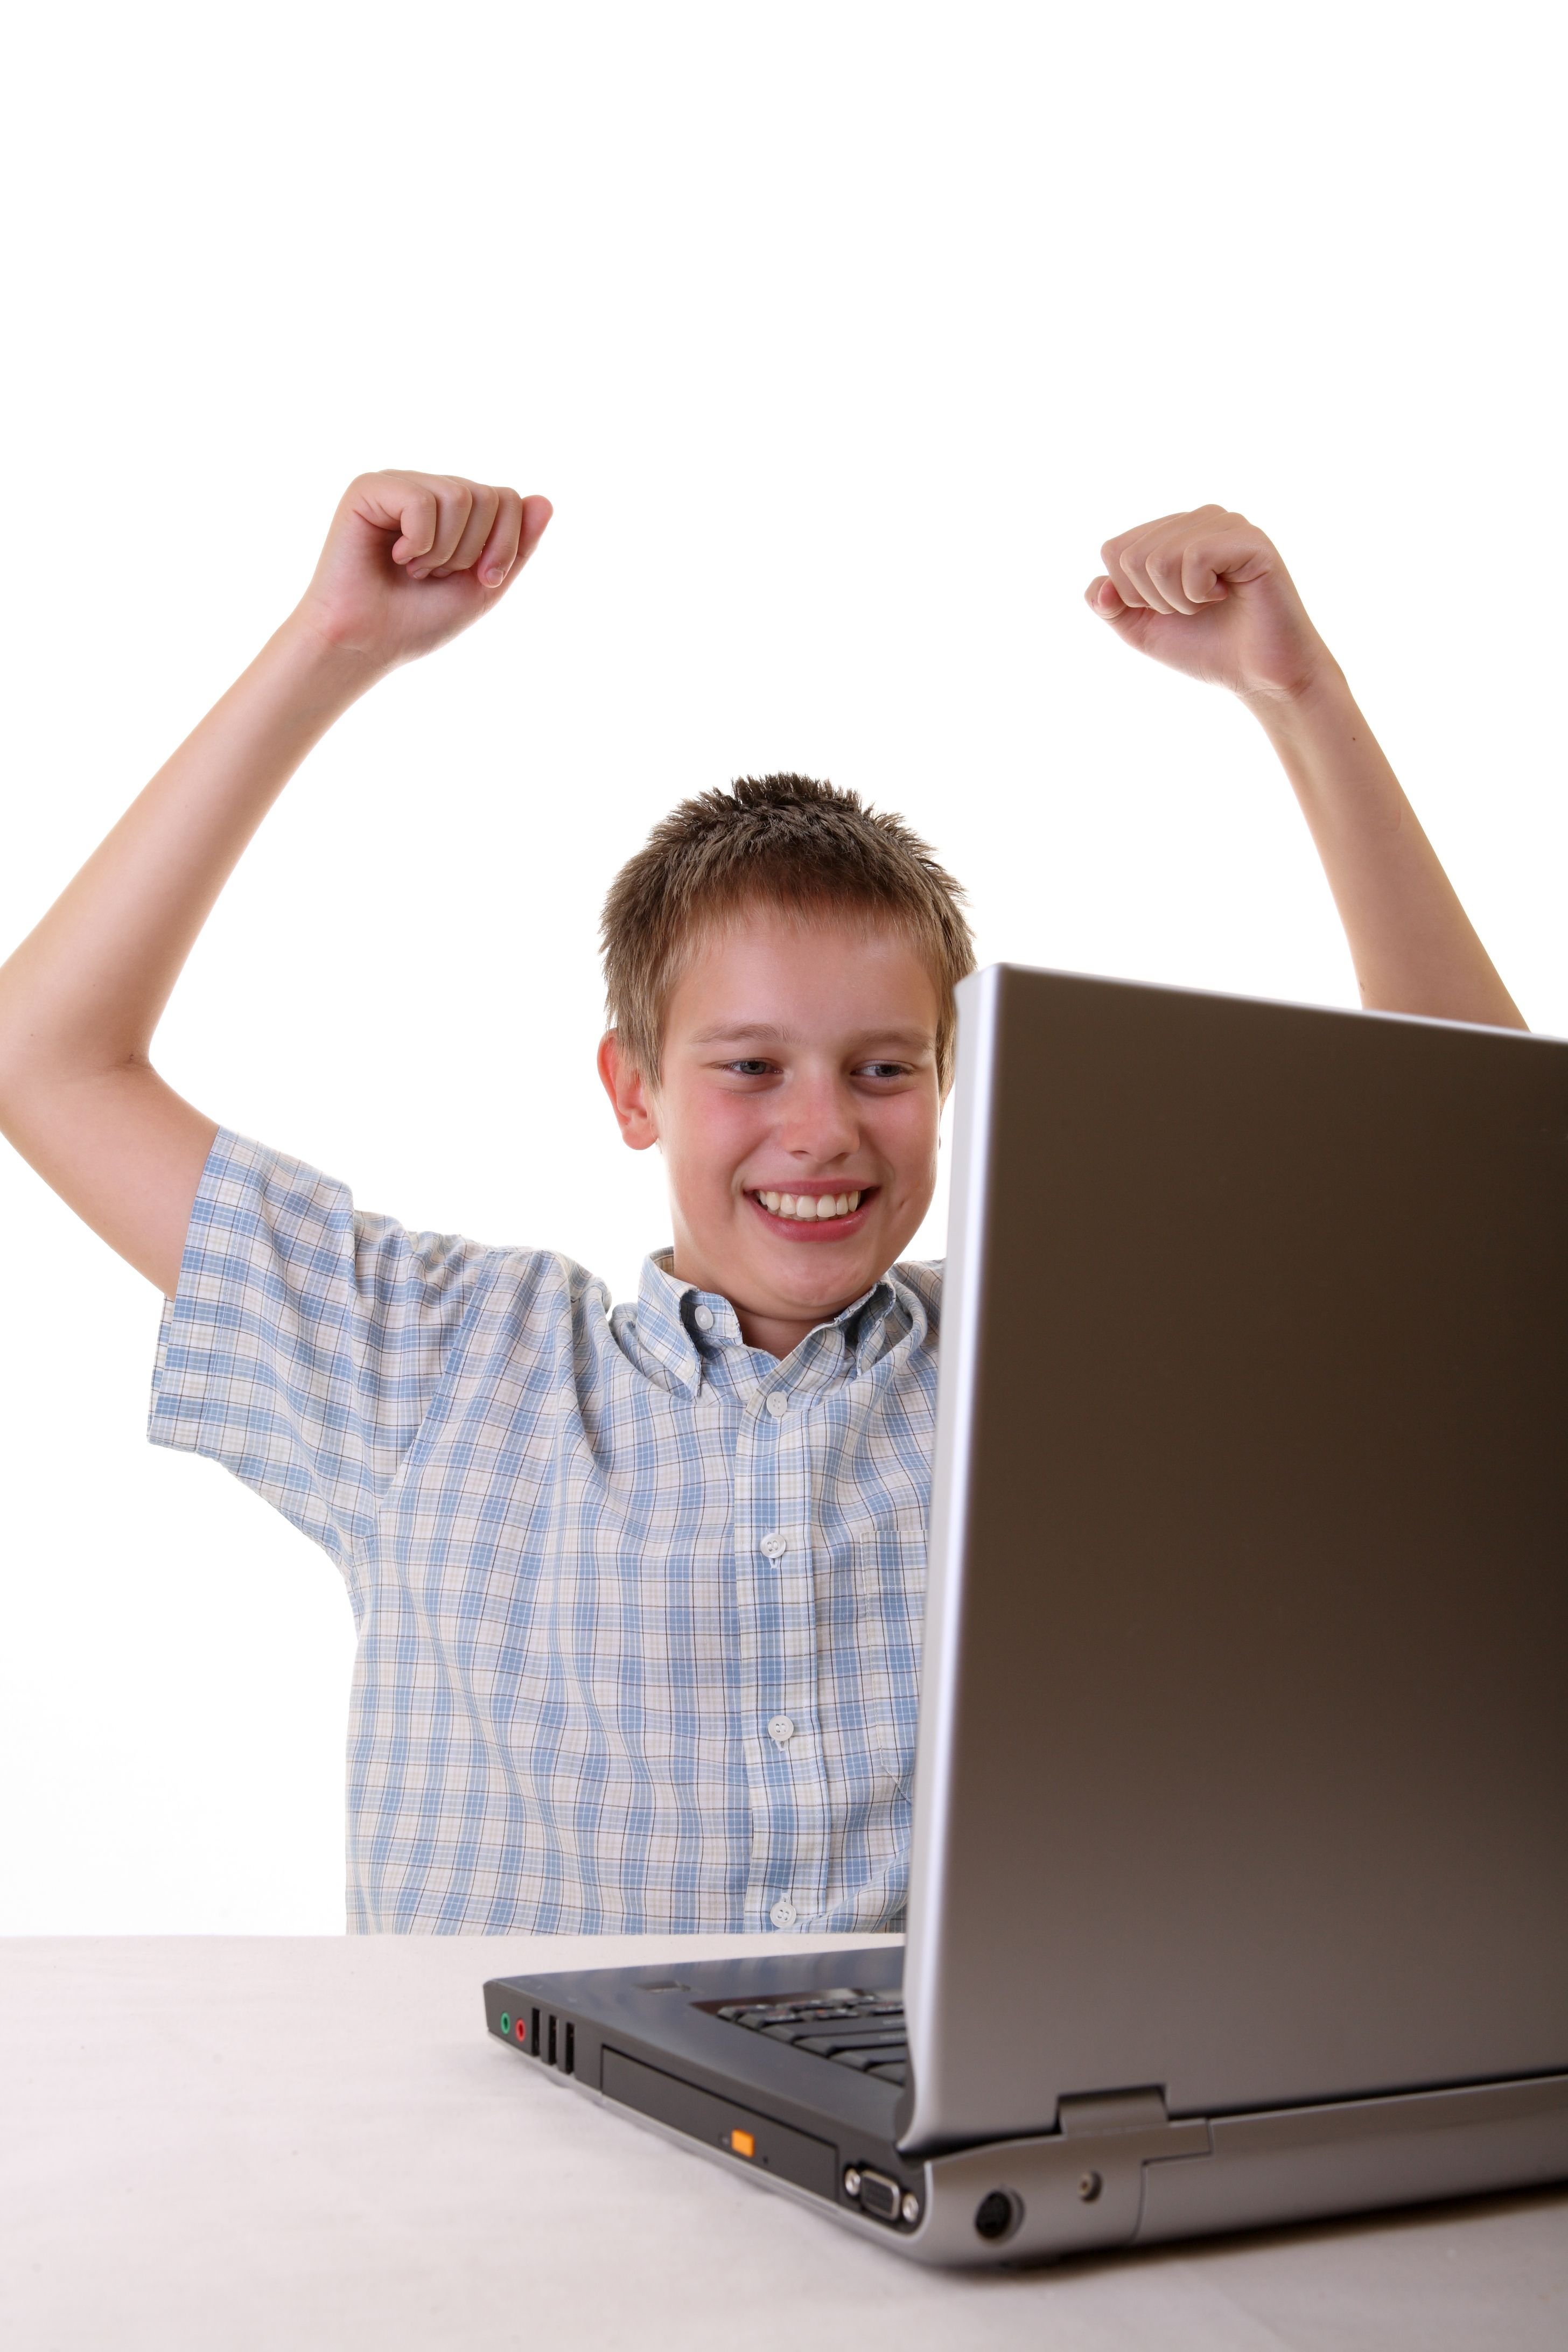 A young boy in front of a laptop. | Source: Shutterstock